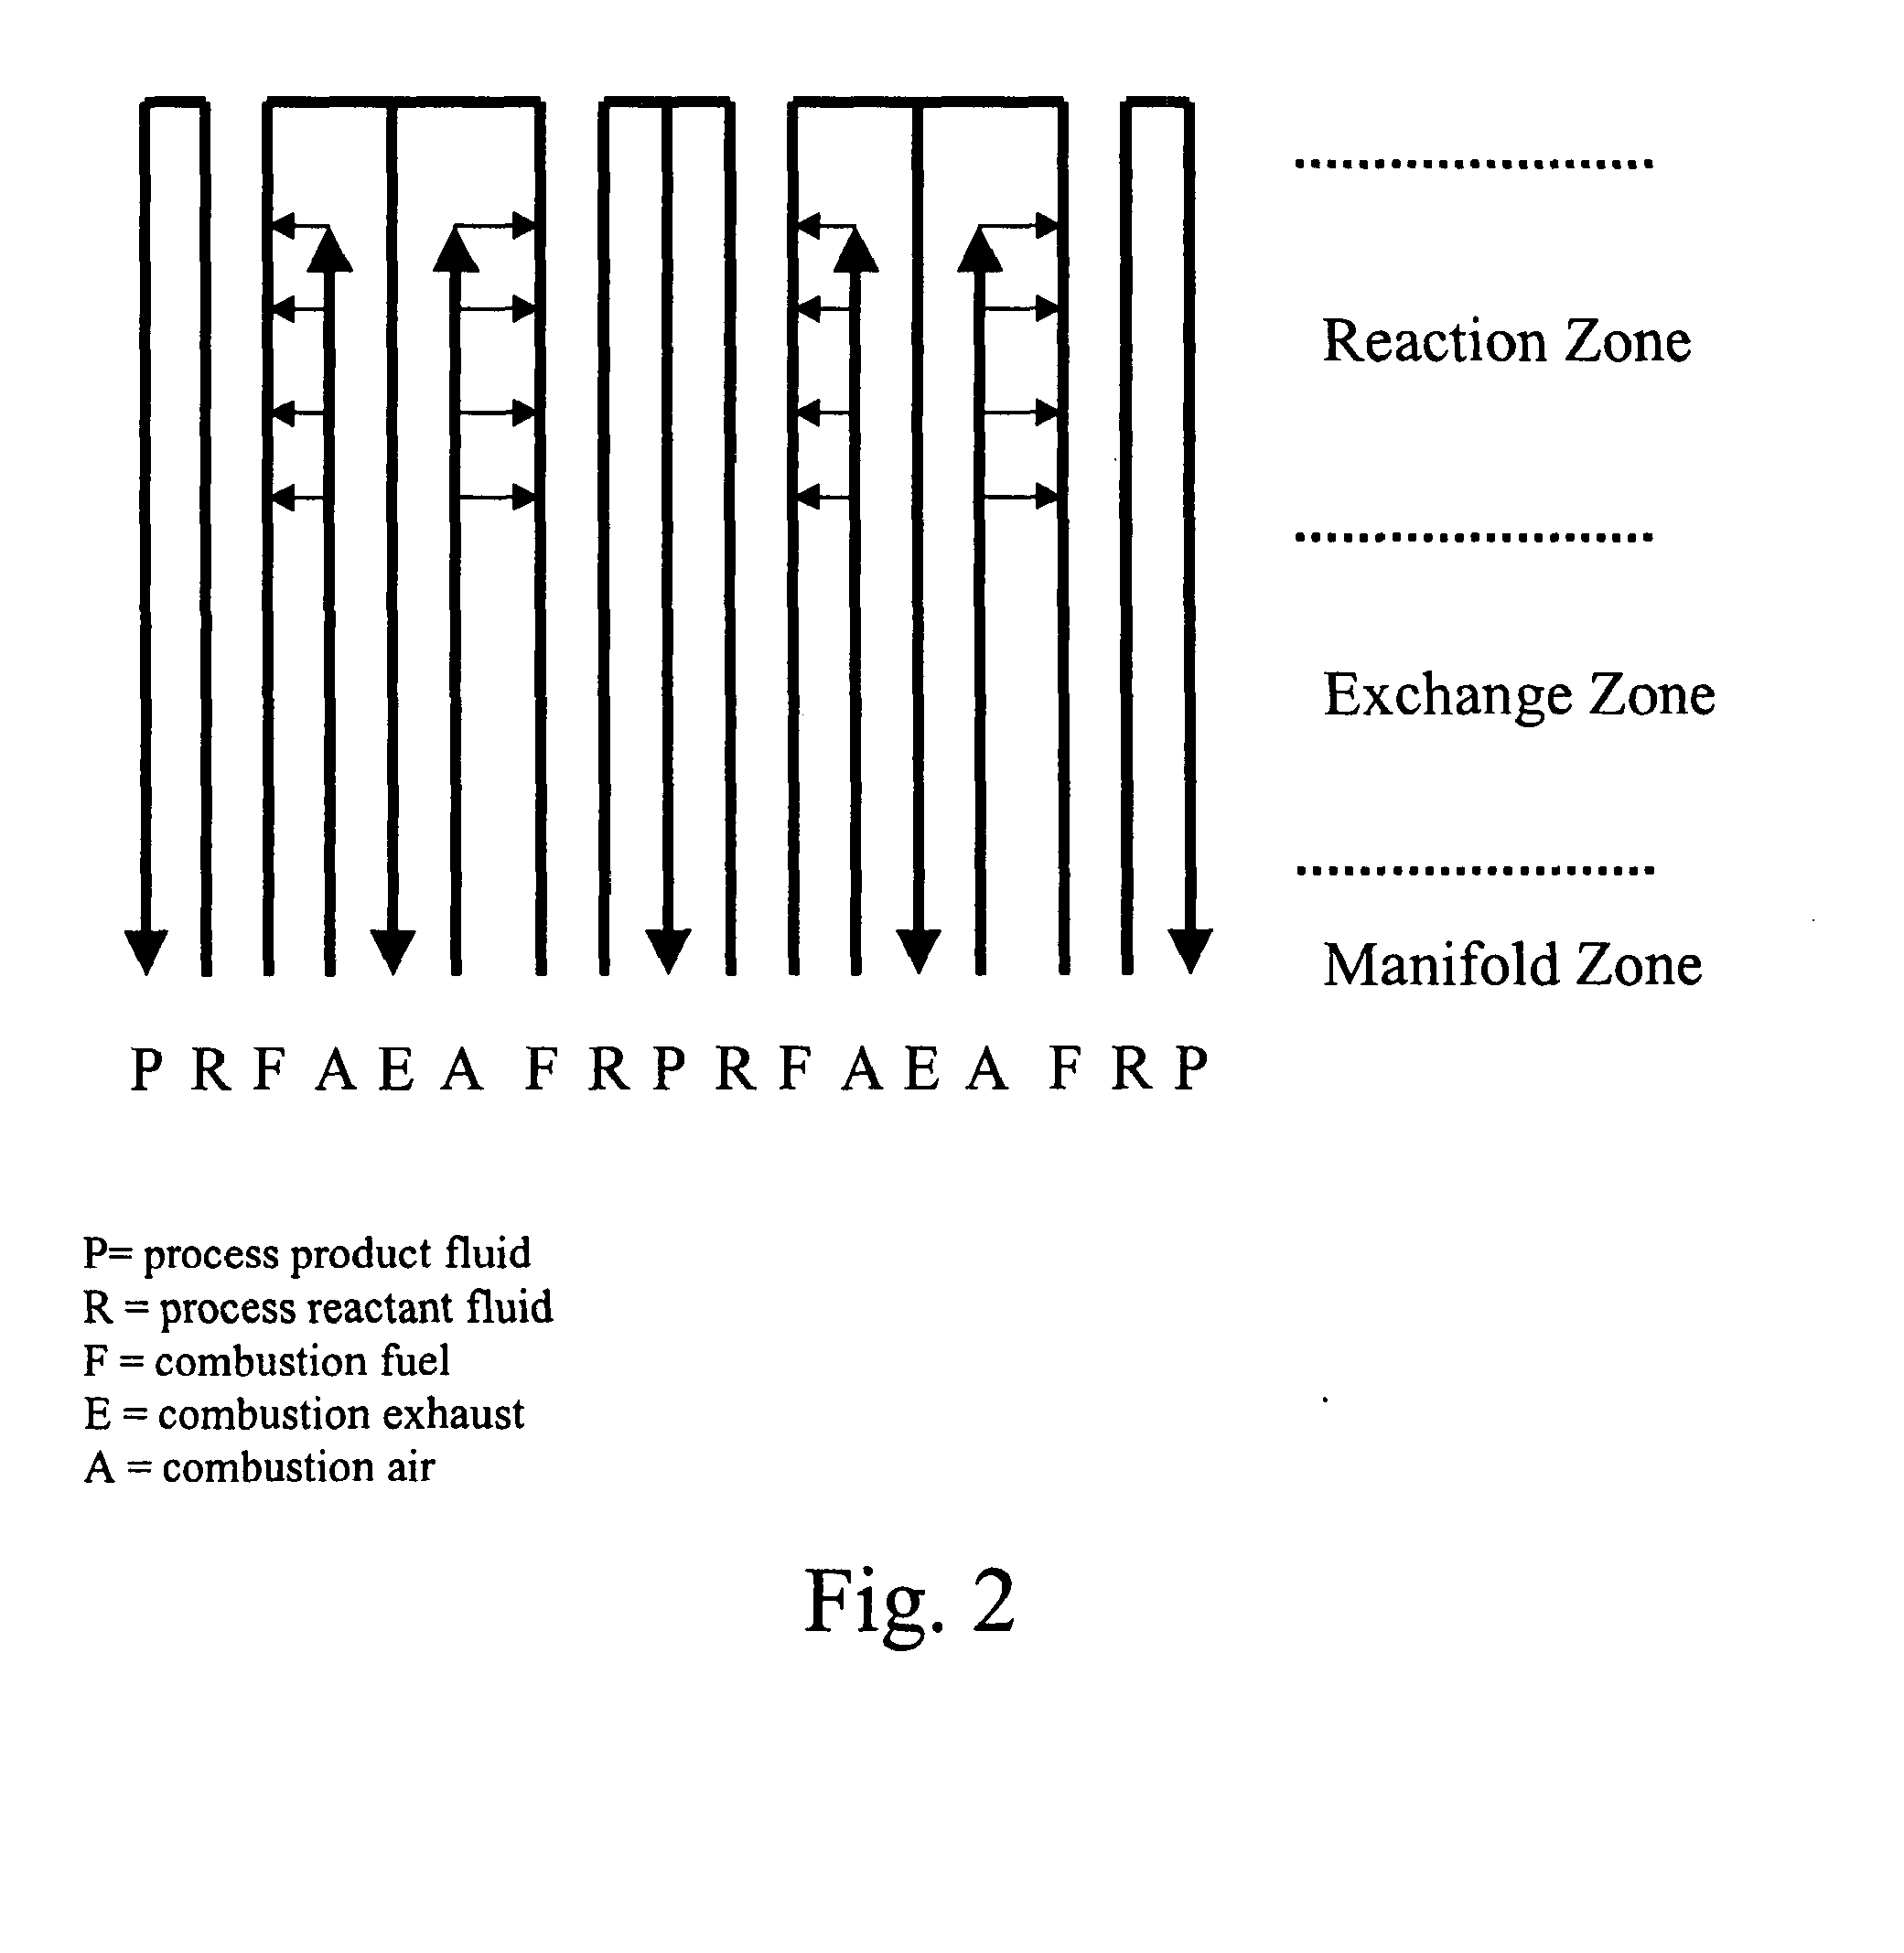 Integrated Combustion Reactor And Methods Of Conducting Simultaneous Endothermic and Exothermic Reactions